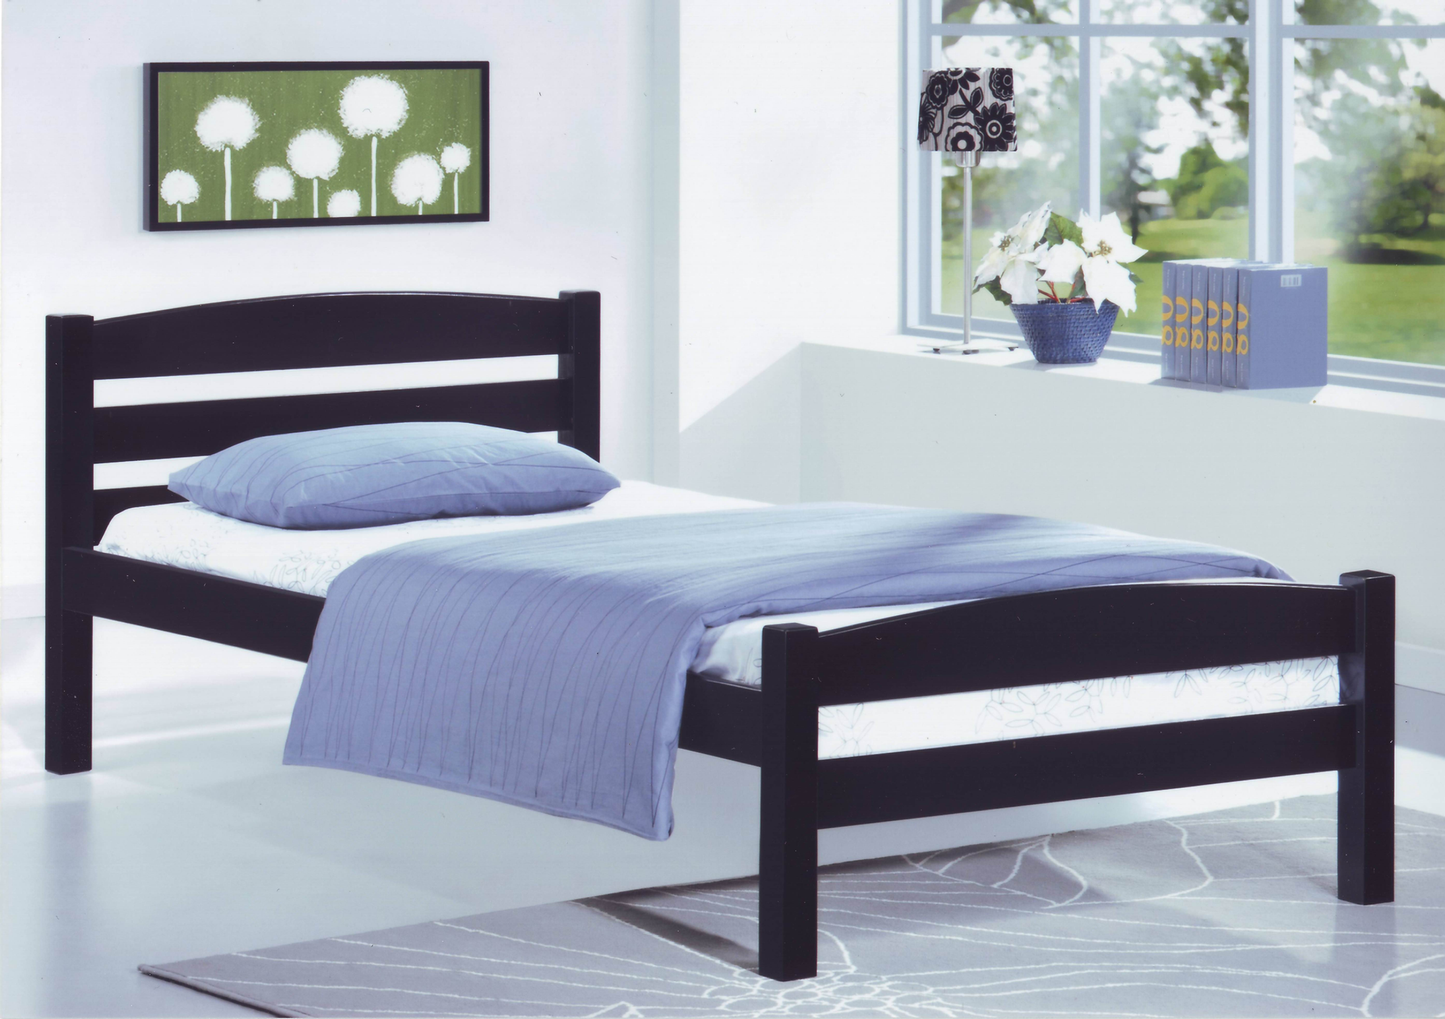 Minimalistic Wooden Youth Bed Frame with Paneled Headboard & Footboard